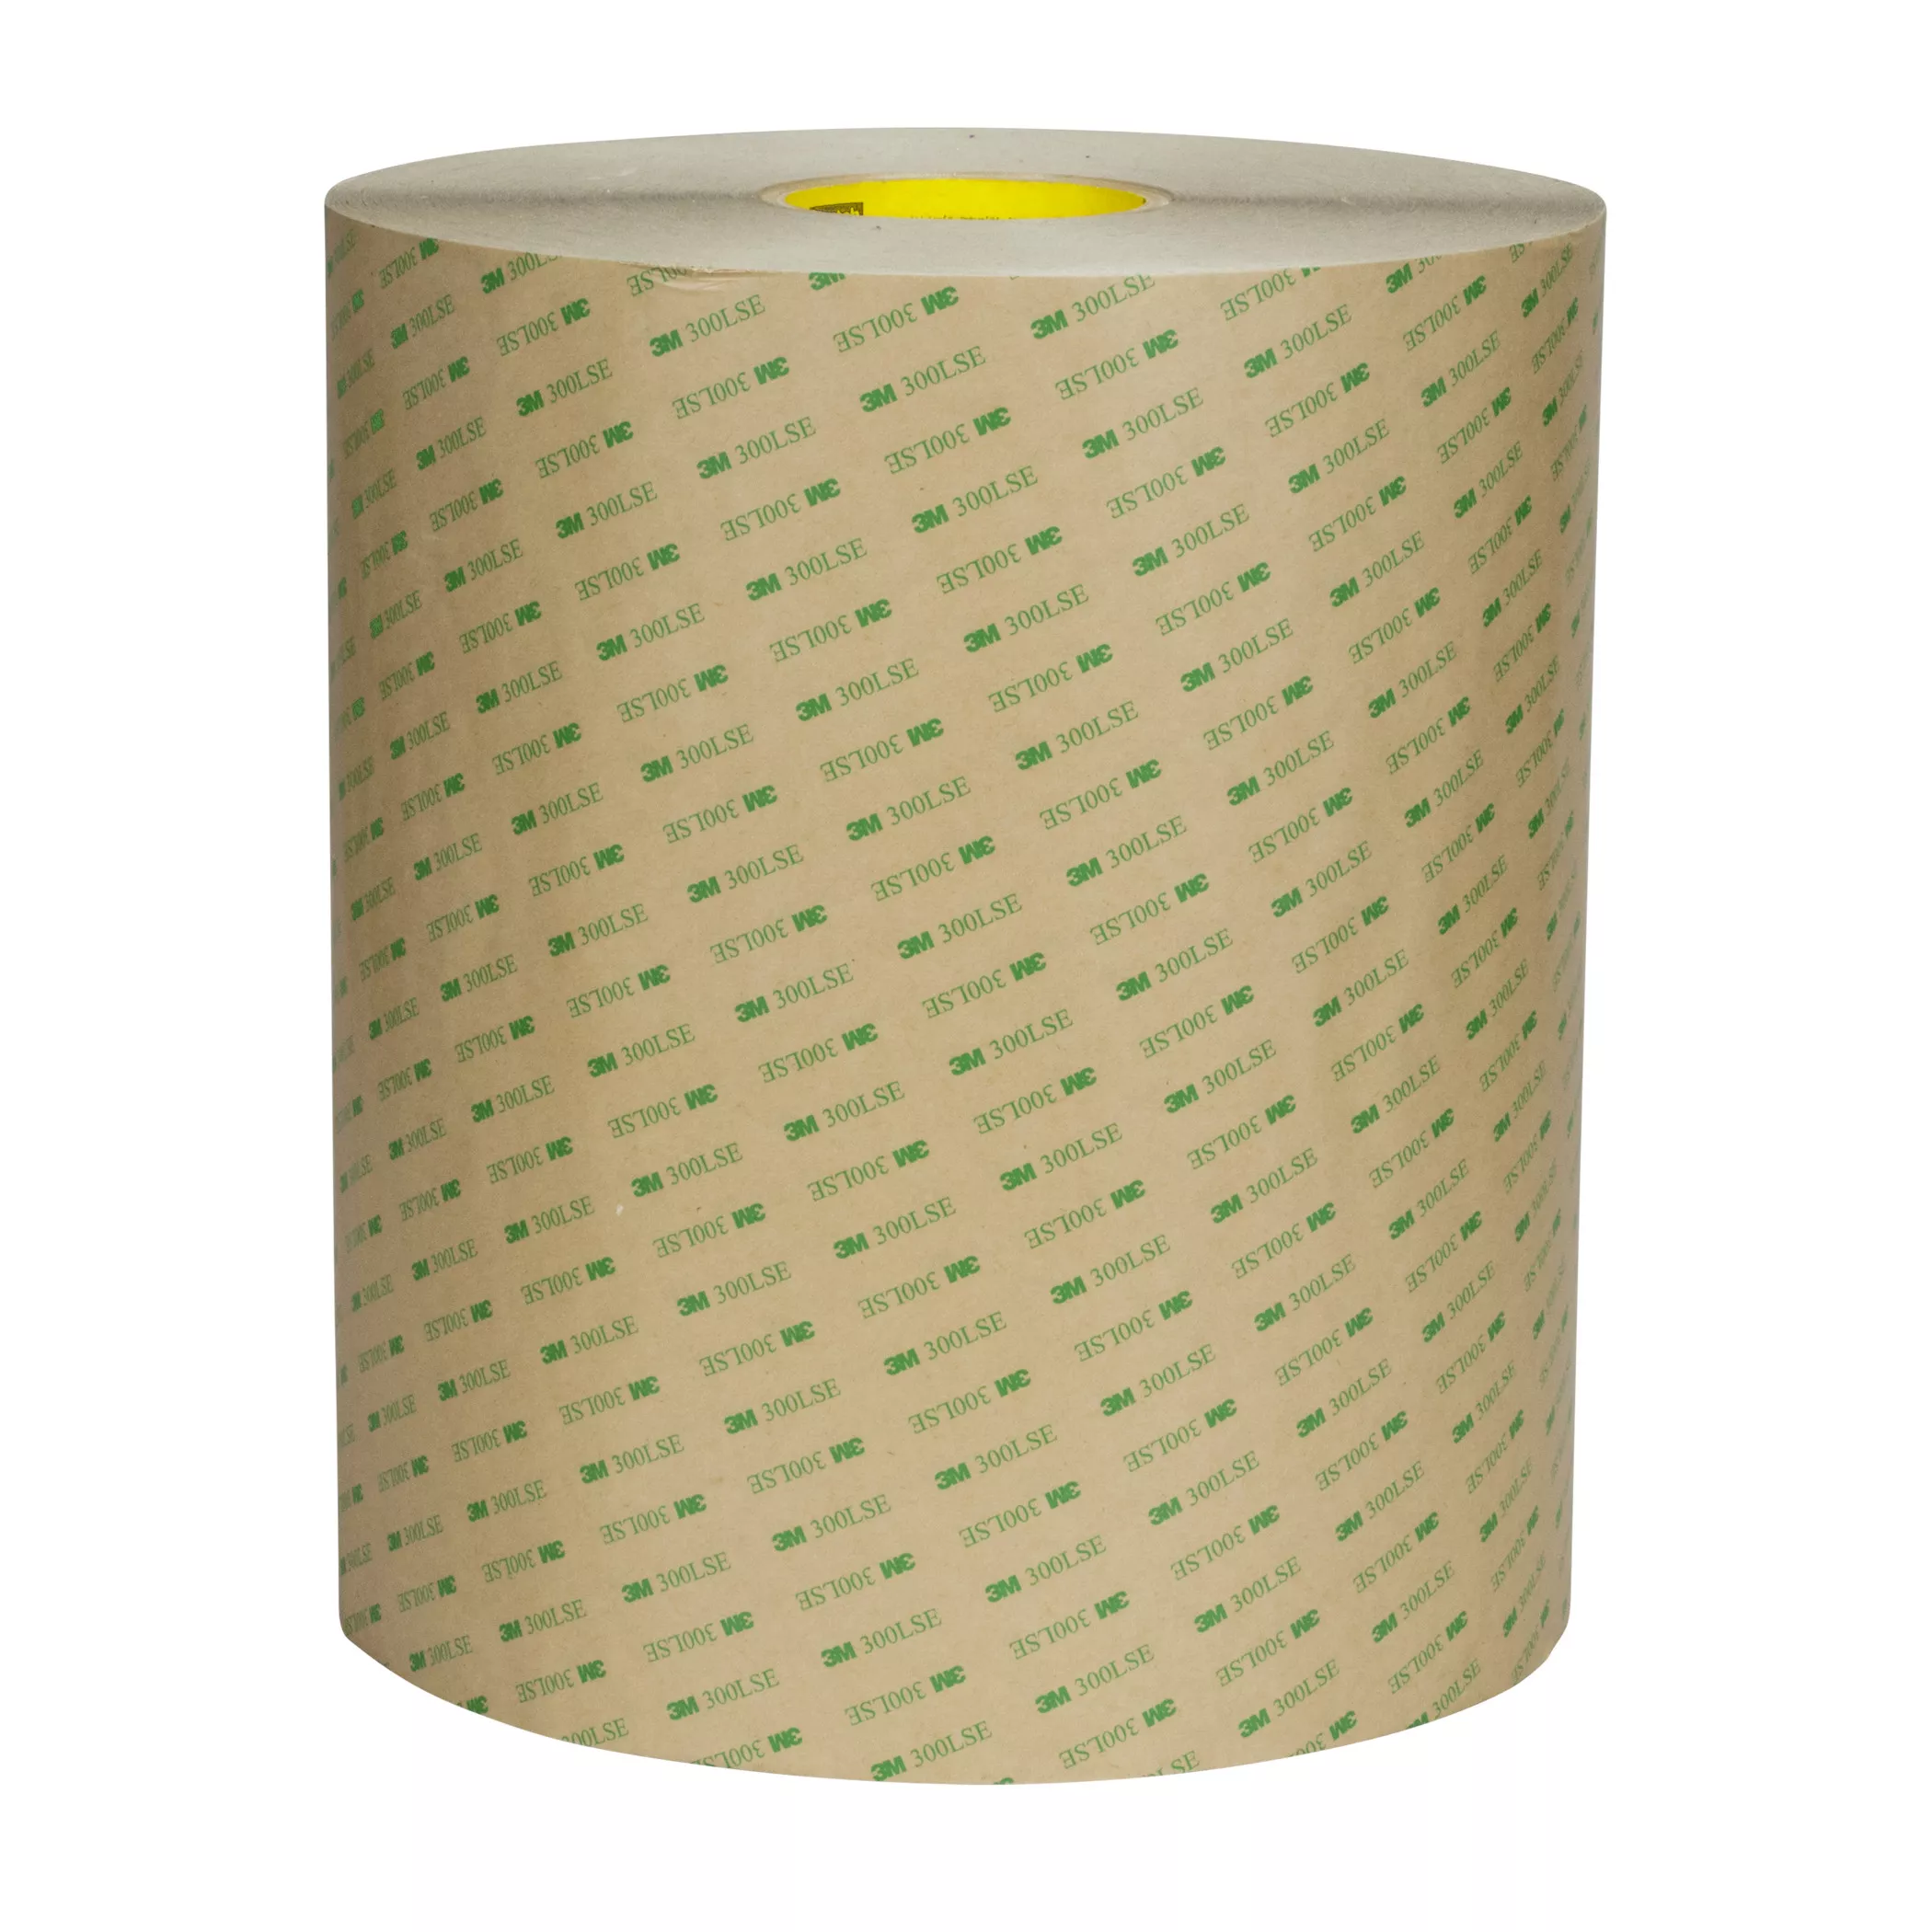 3M™ Double Coated Tape 93020LE, Clear, 54 in x 180 yd, 7.9 mil, 1
Roll/Case